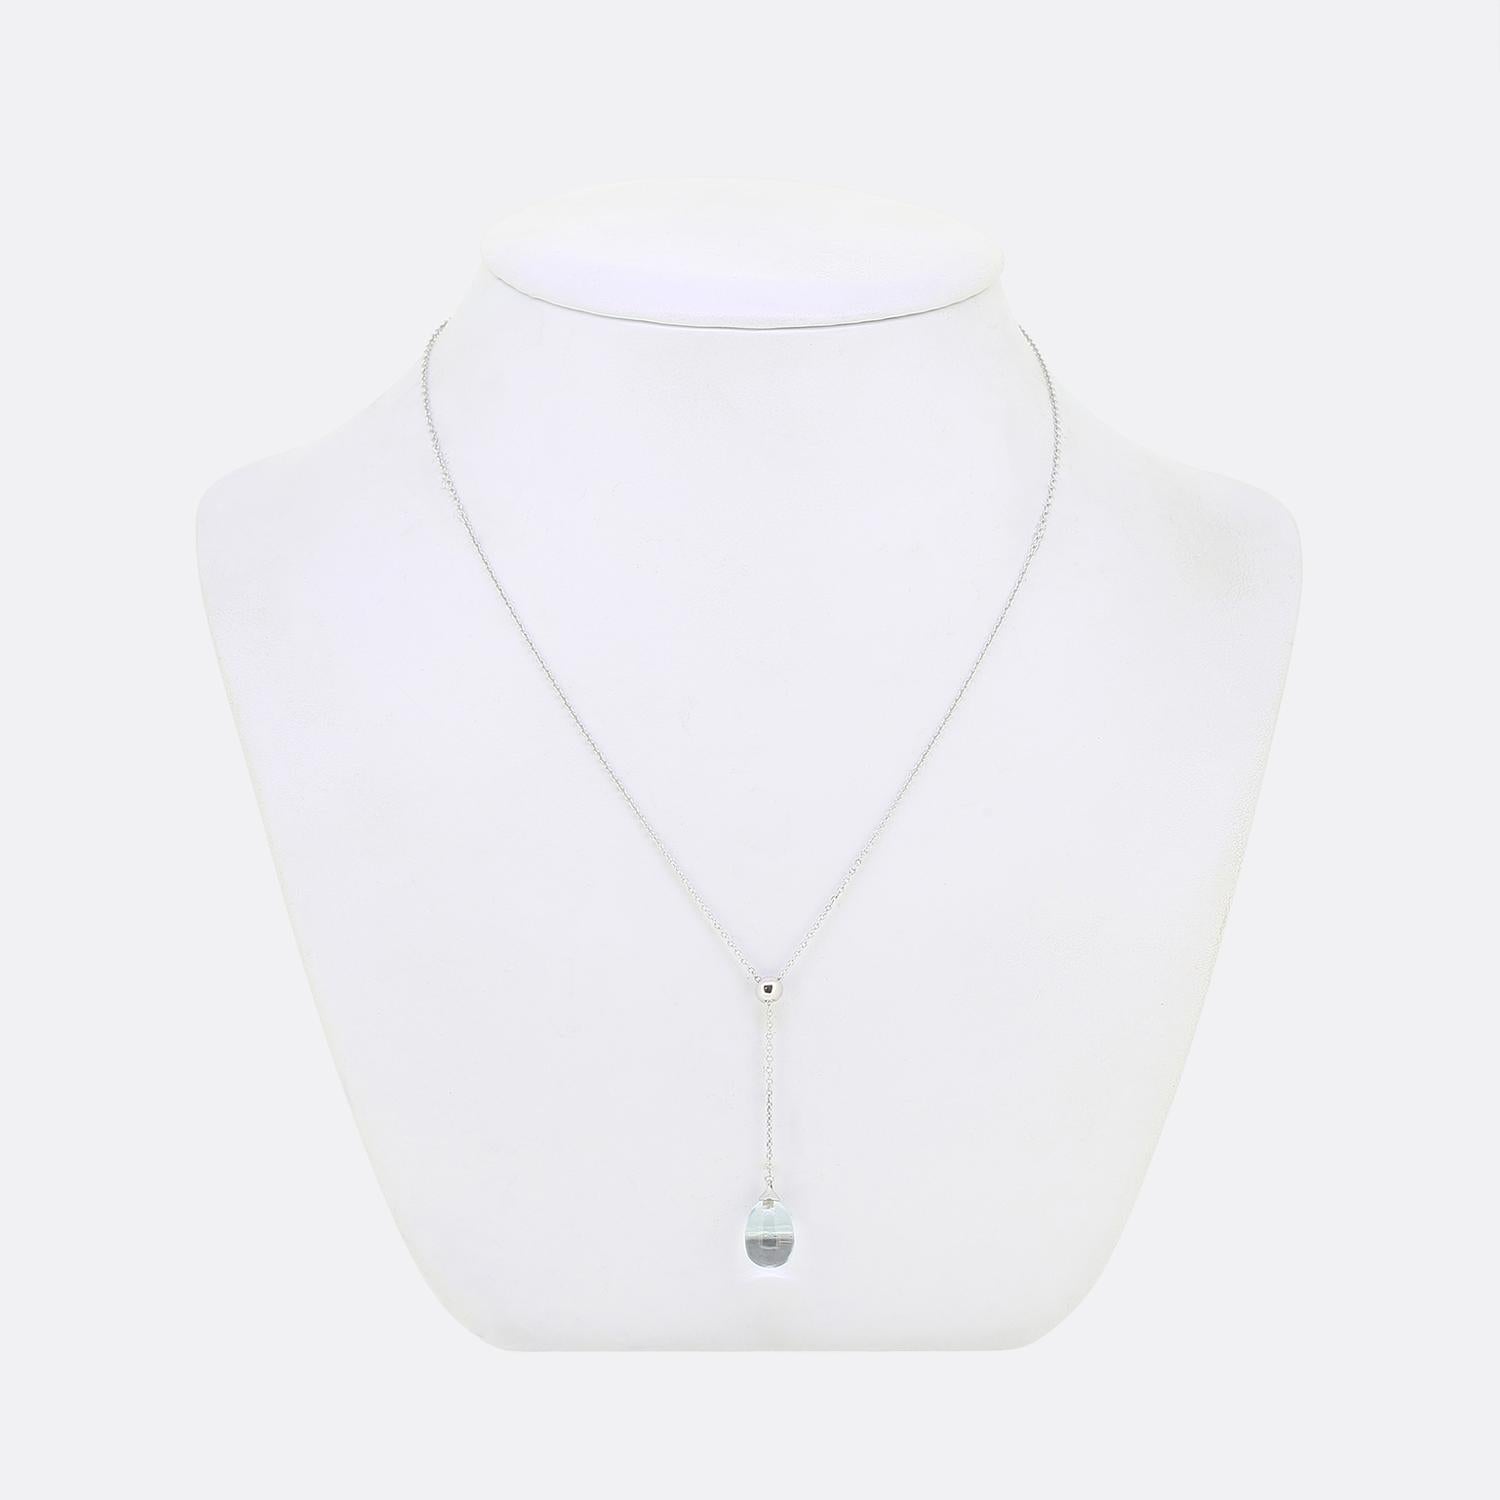 Here we have fabulous necklace from the world renowned jewellery designer, Tiffany & Co. This pendant has been crafted from 18ct white gold with a plain polished ball motif atop playing host to a slim belcher chain which suspends a freely hanging